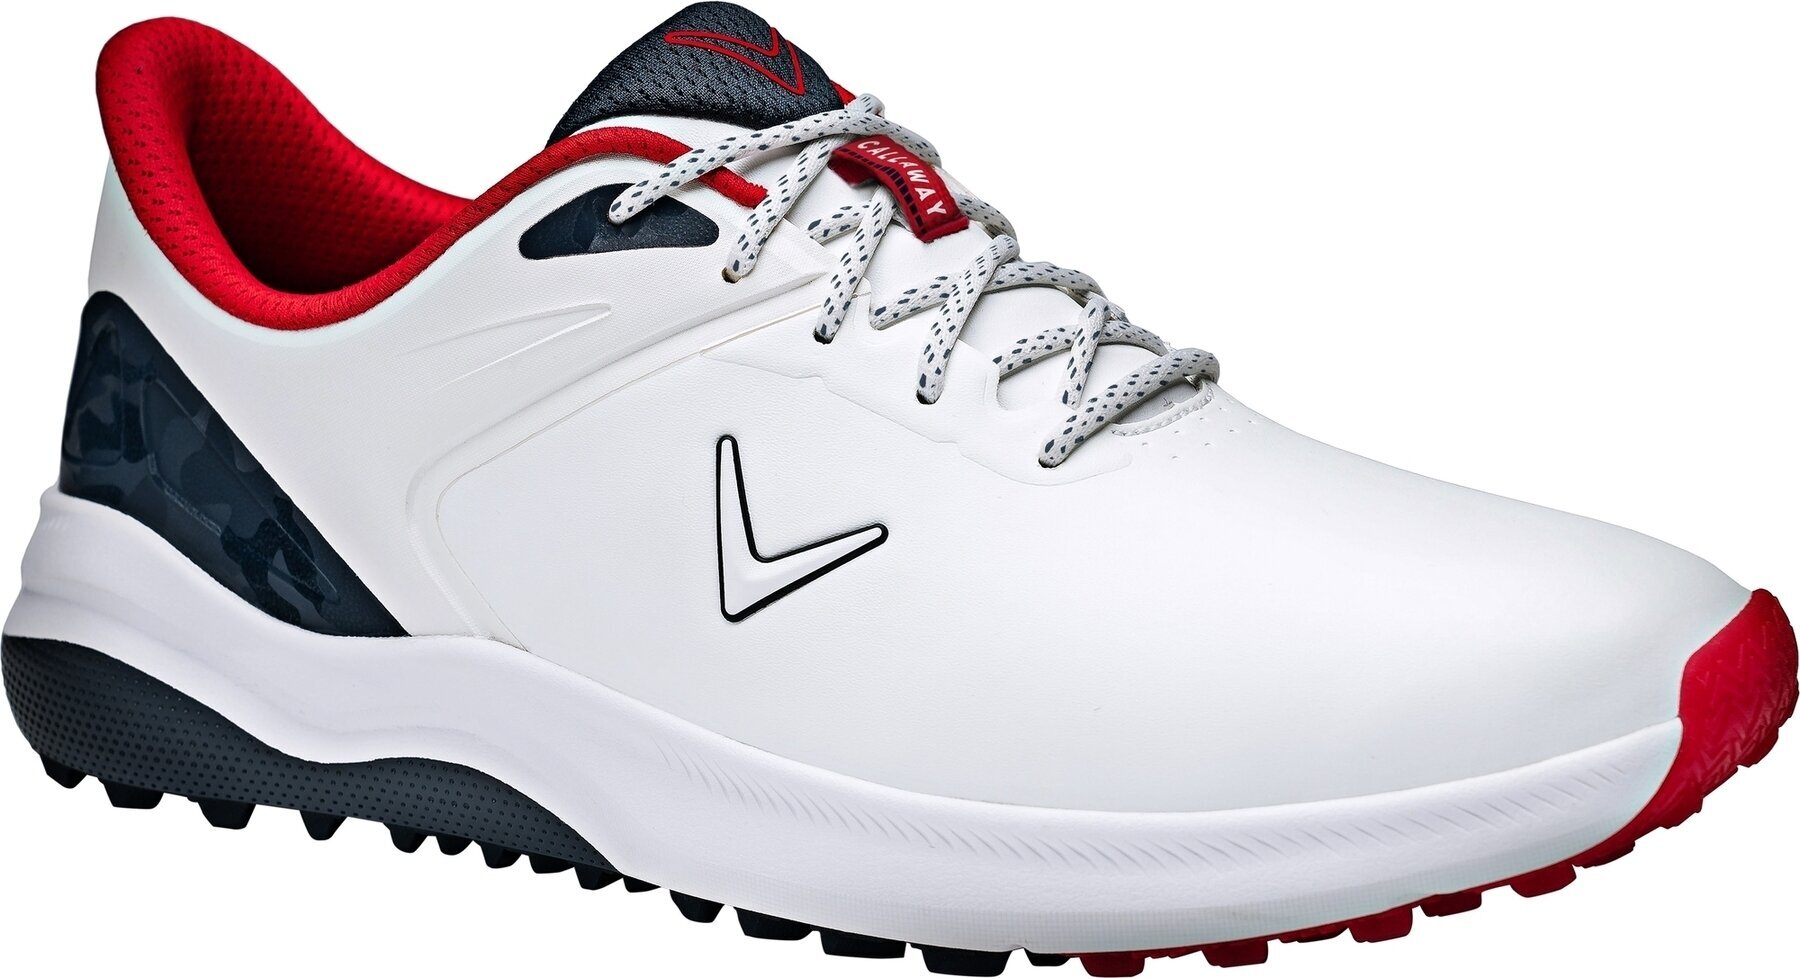 Men's golf shoes Callaway Lazer Mens Golf Shoes White/Navy/Red 44,5